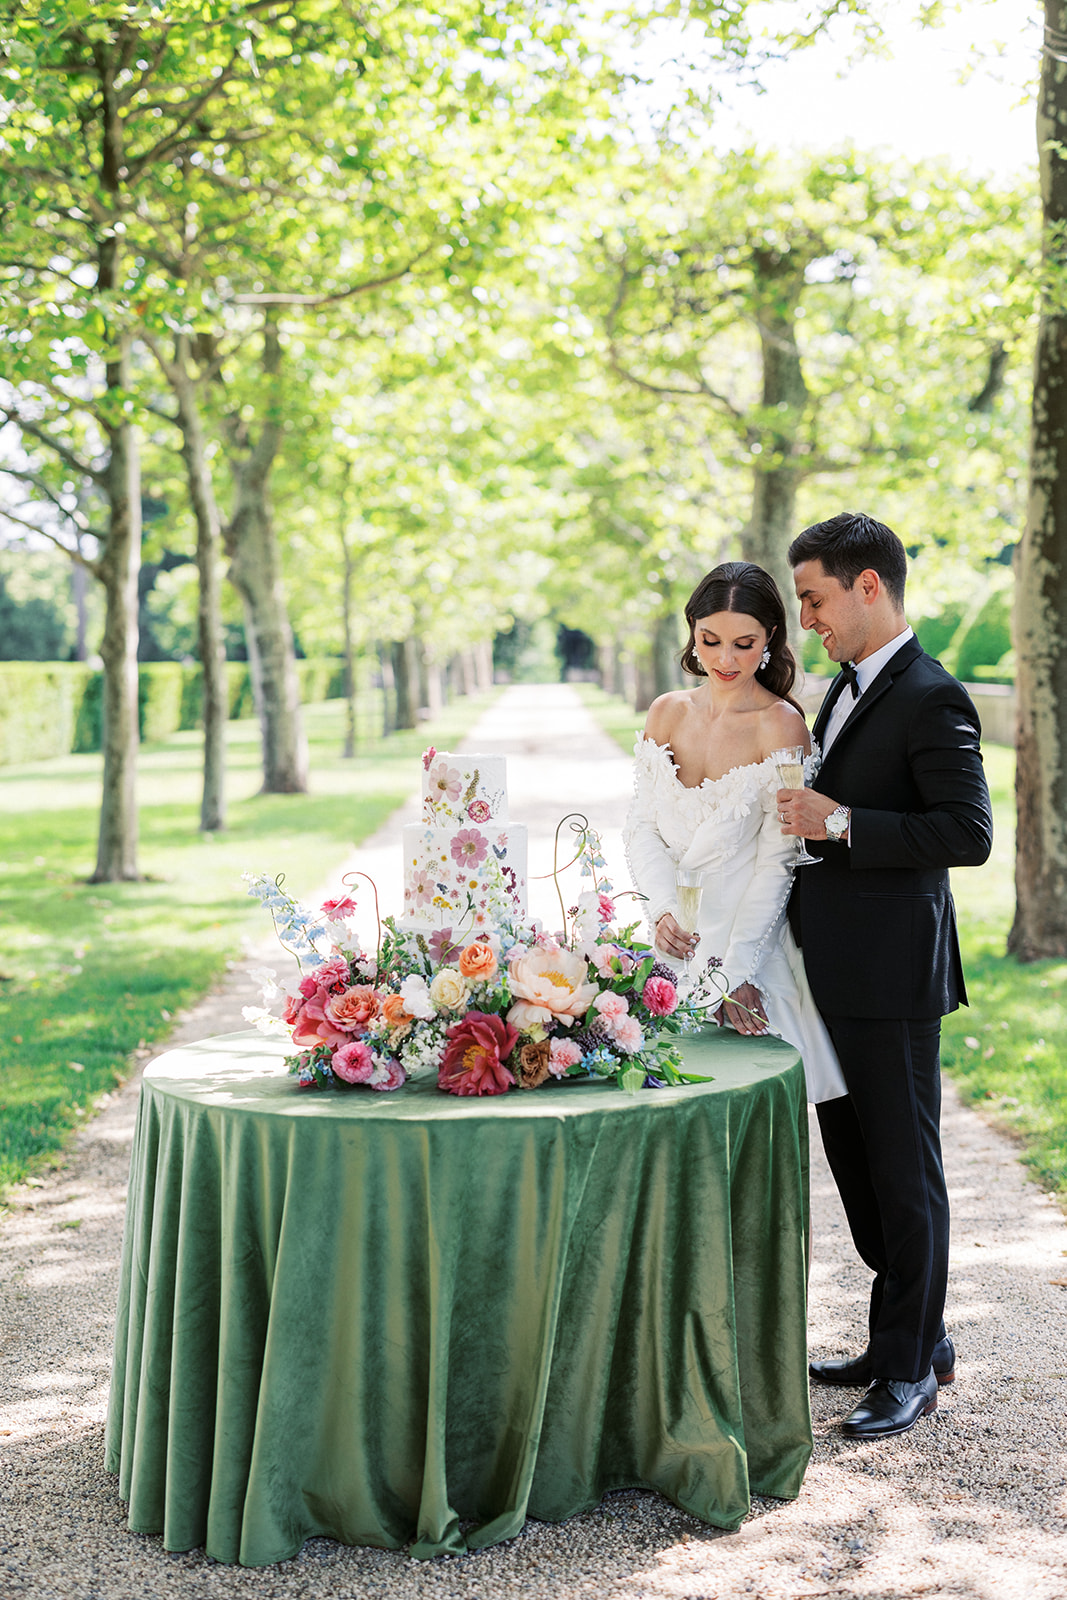 Newlyweds stand at their outdoor cake table holding champagne glasses at an Oheka Castle wedding